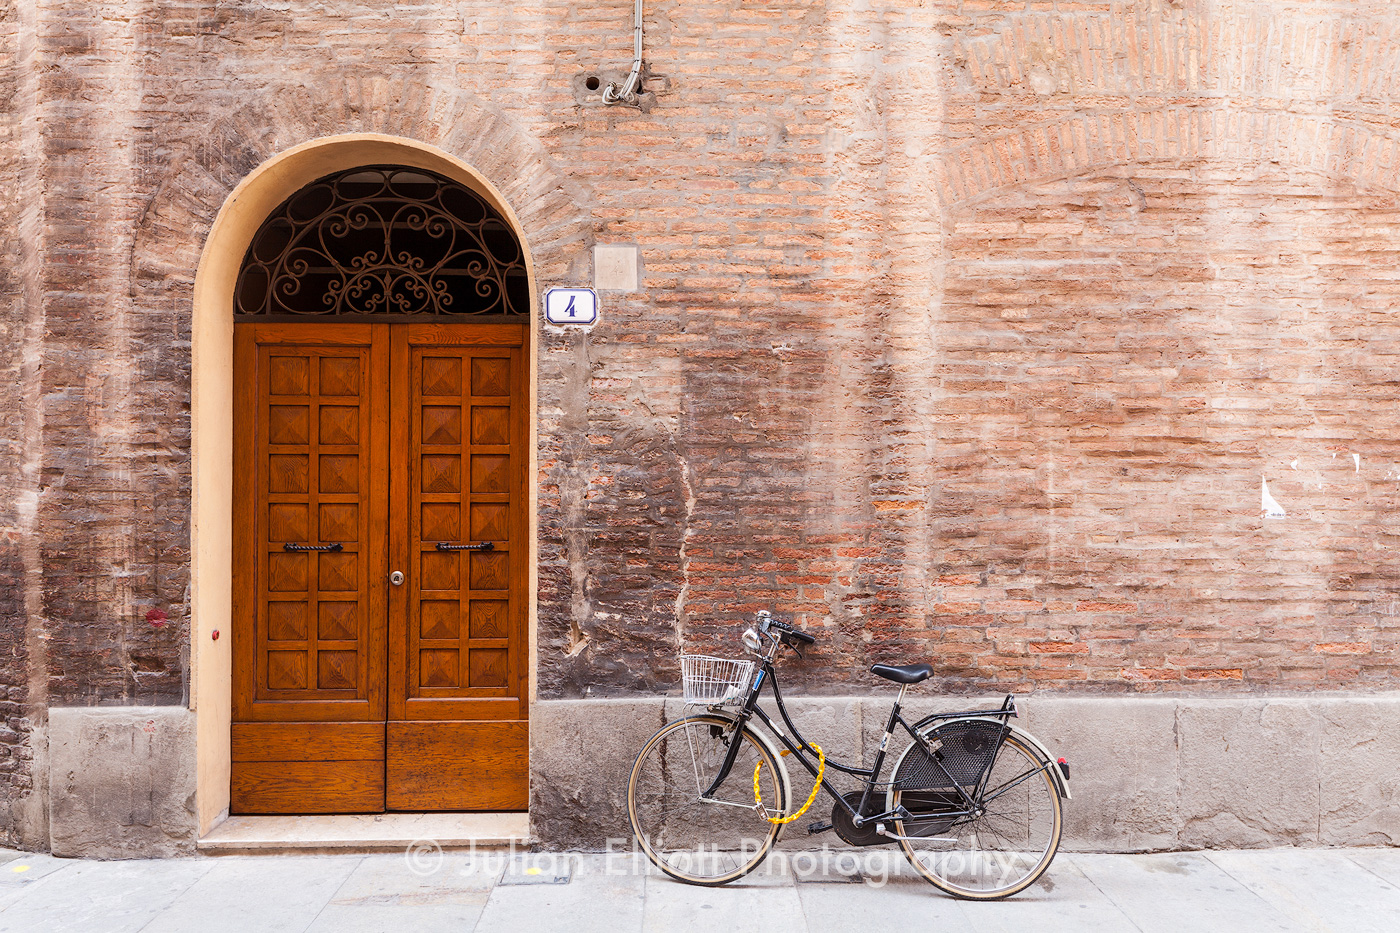 An old door and bicycle in Modena, Italy.